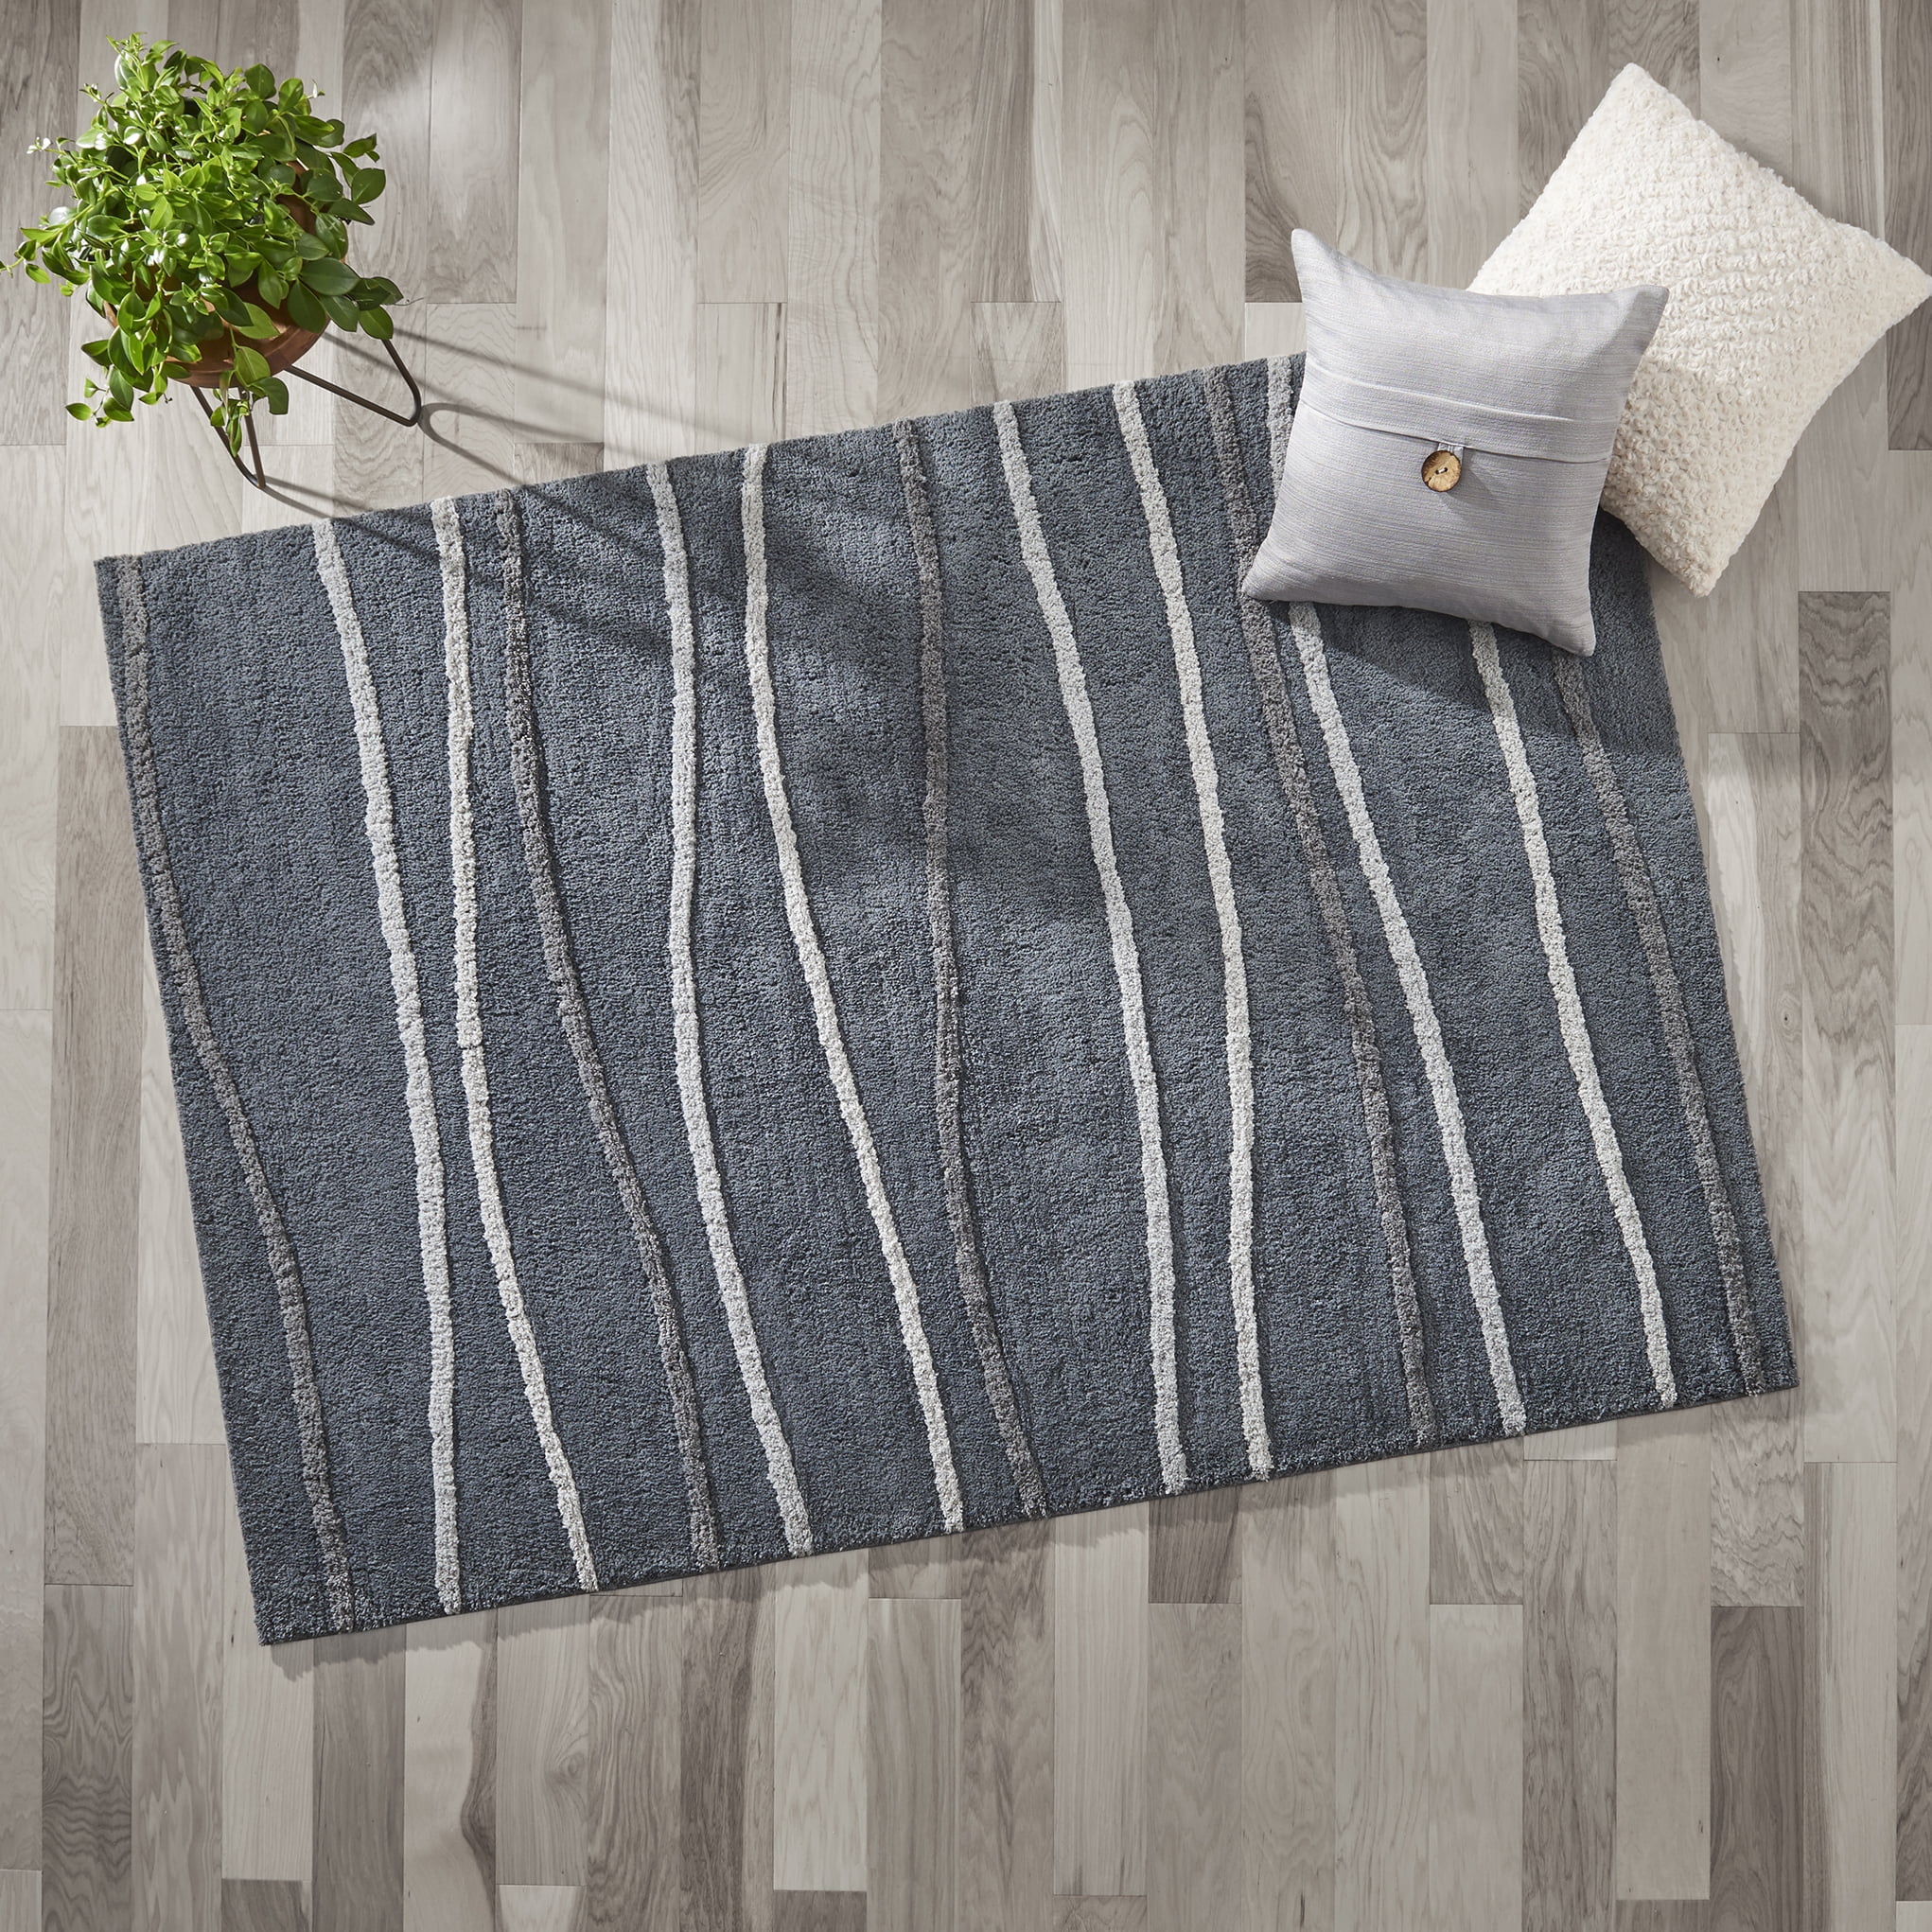 Grey Waves Rug, Better Homes And Gardens Geo Waves Textured Print Area Rugs 8×10